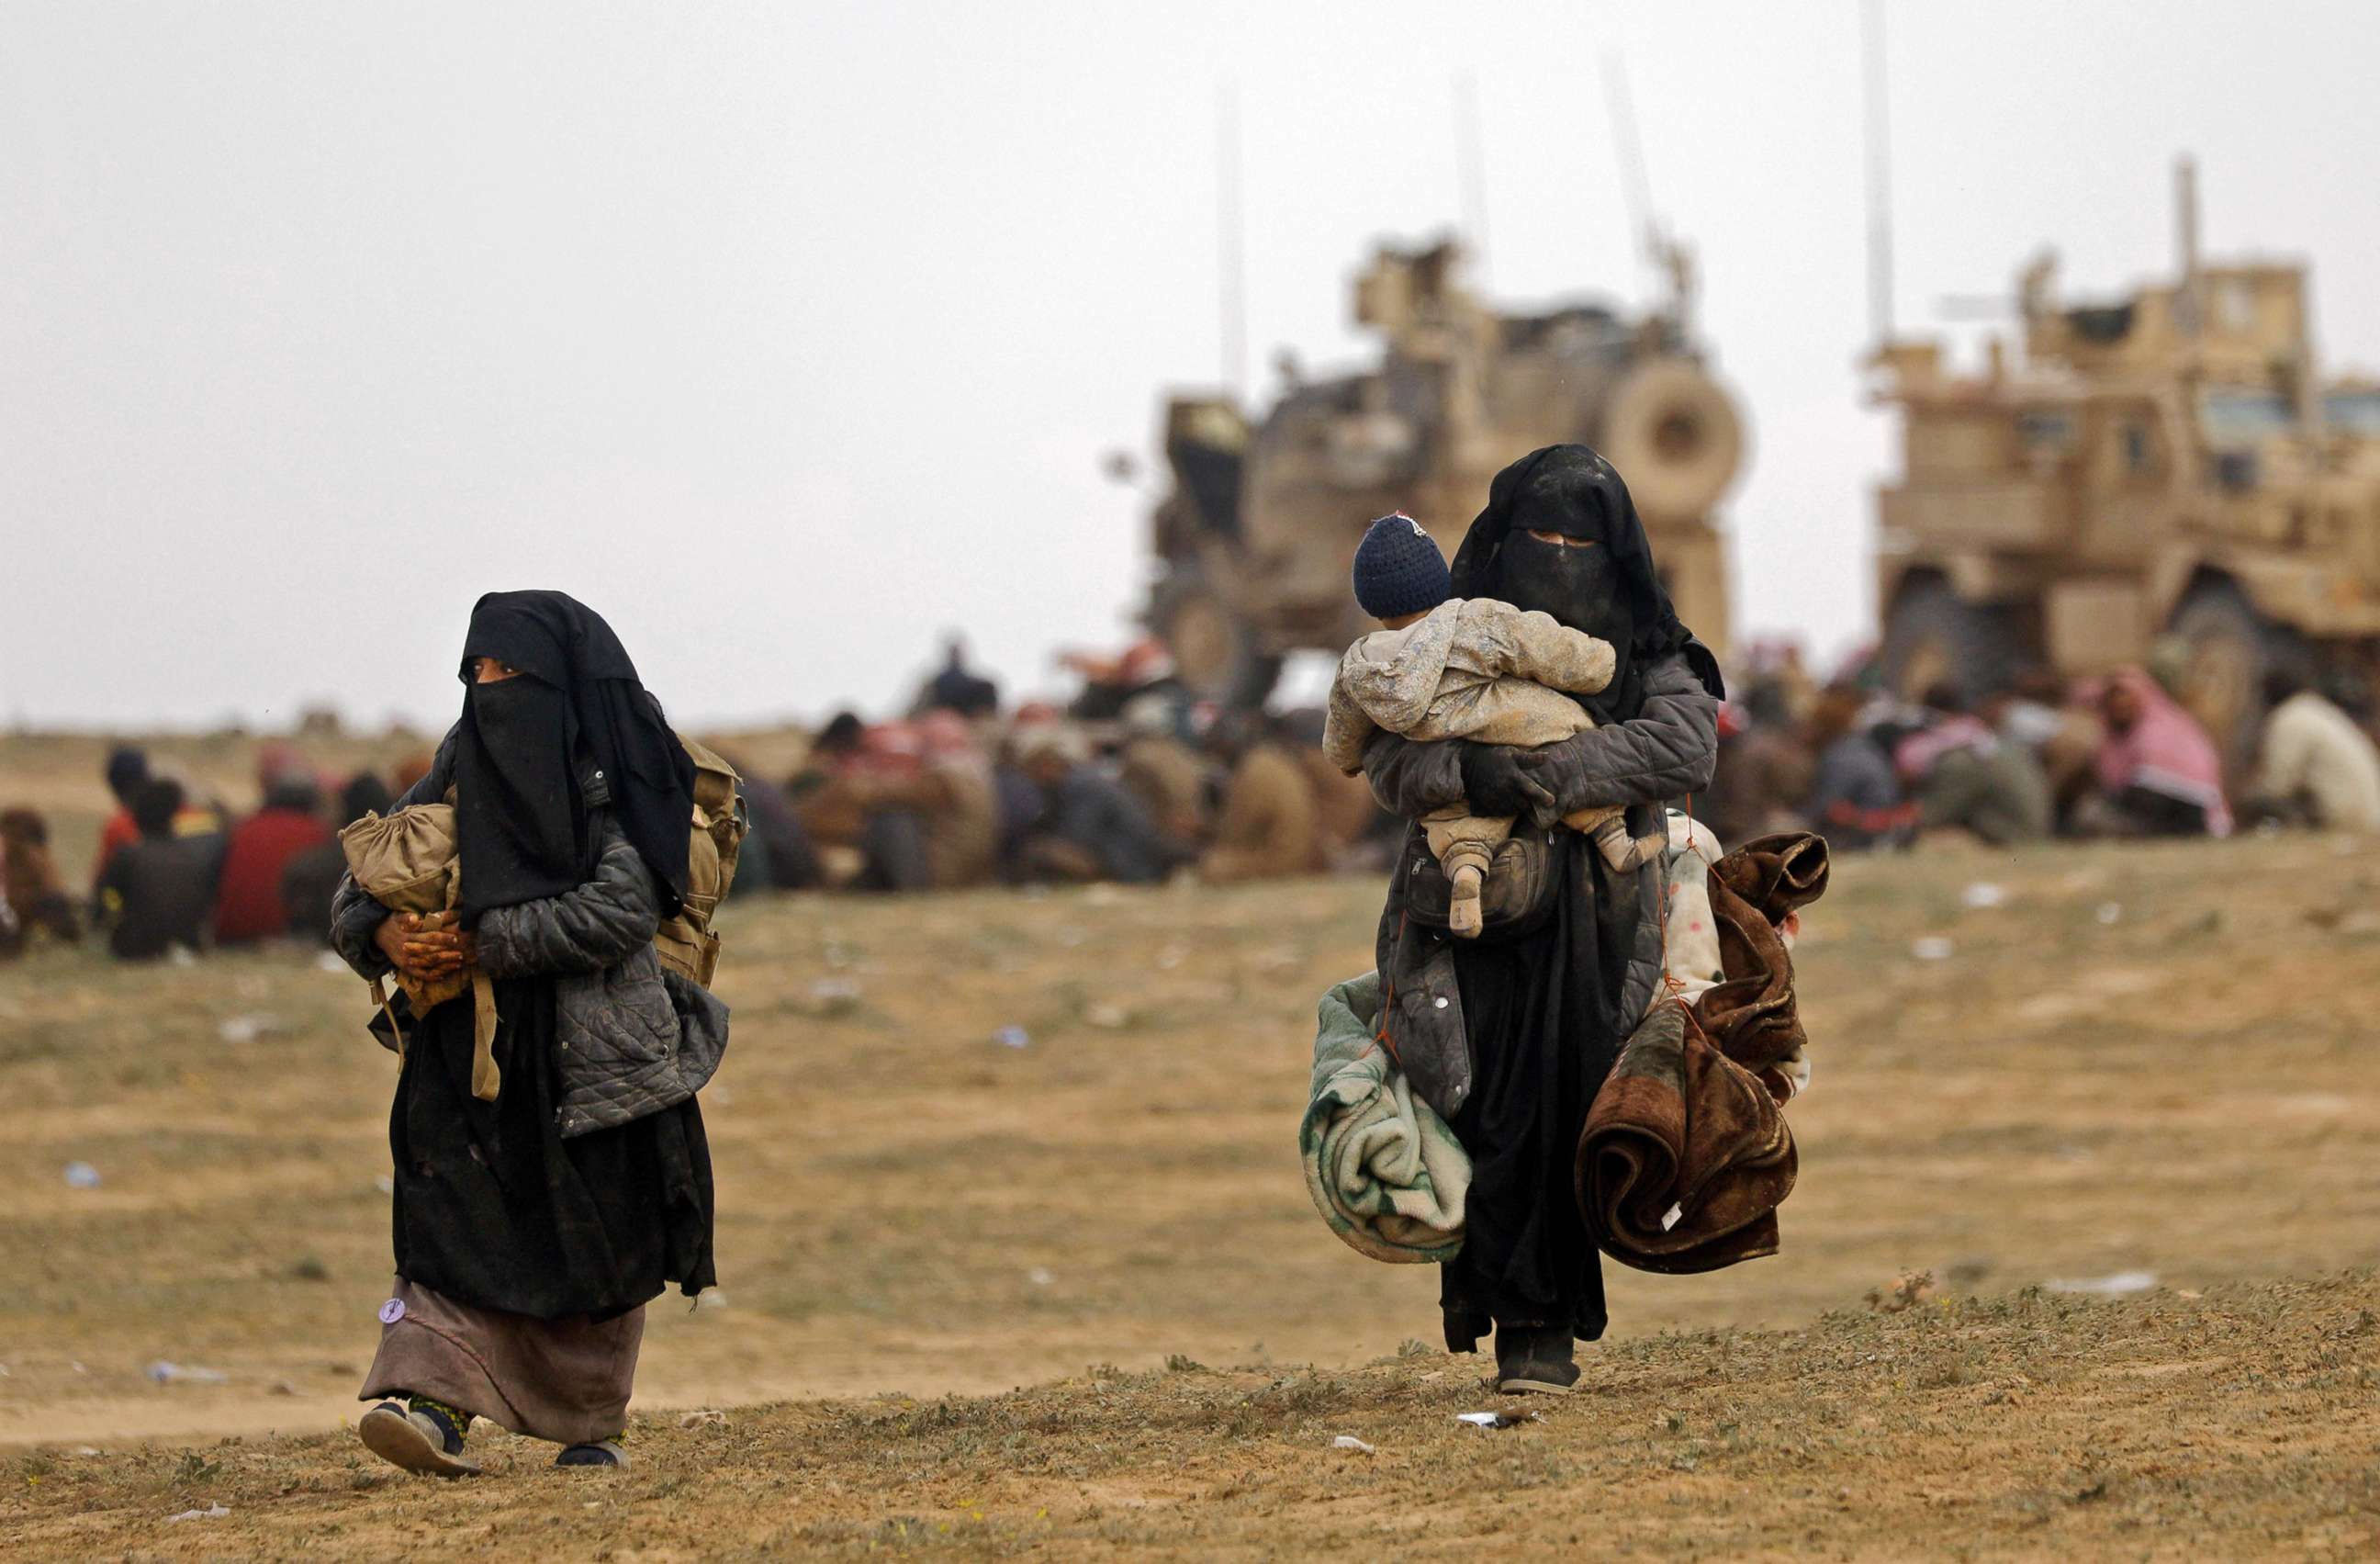 PHOTO: Civilians fleeing the ISIS embattled holdout of Baghouz walk in a field on Feb. 13, 2019, during an operation by the U.S.-backed Syrian Democratic Forces (SDF) to expel the group from the area, in the eastern Syrian province of Deir Ezzor.